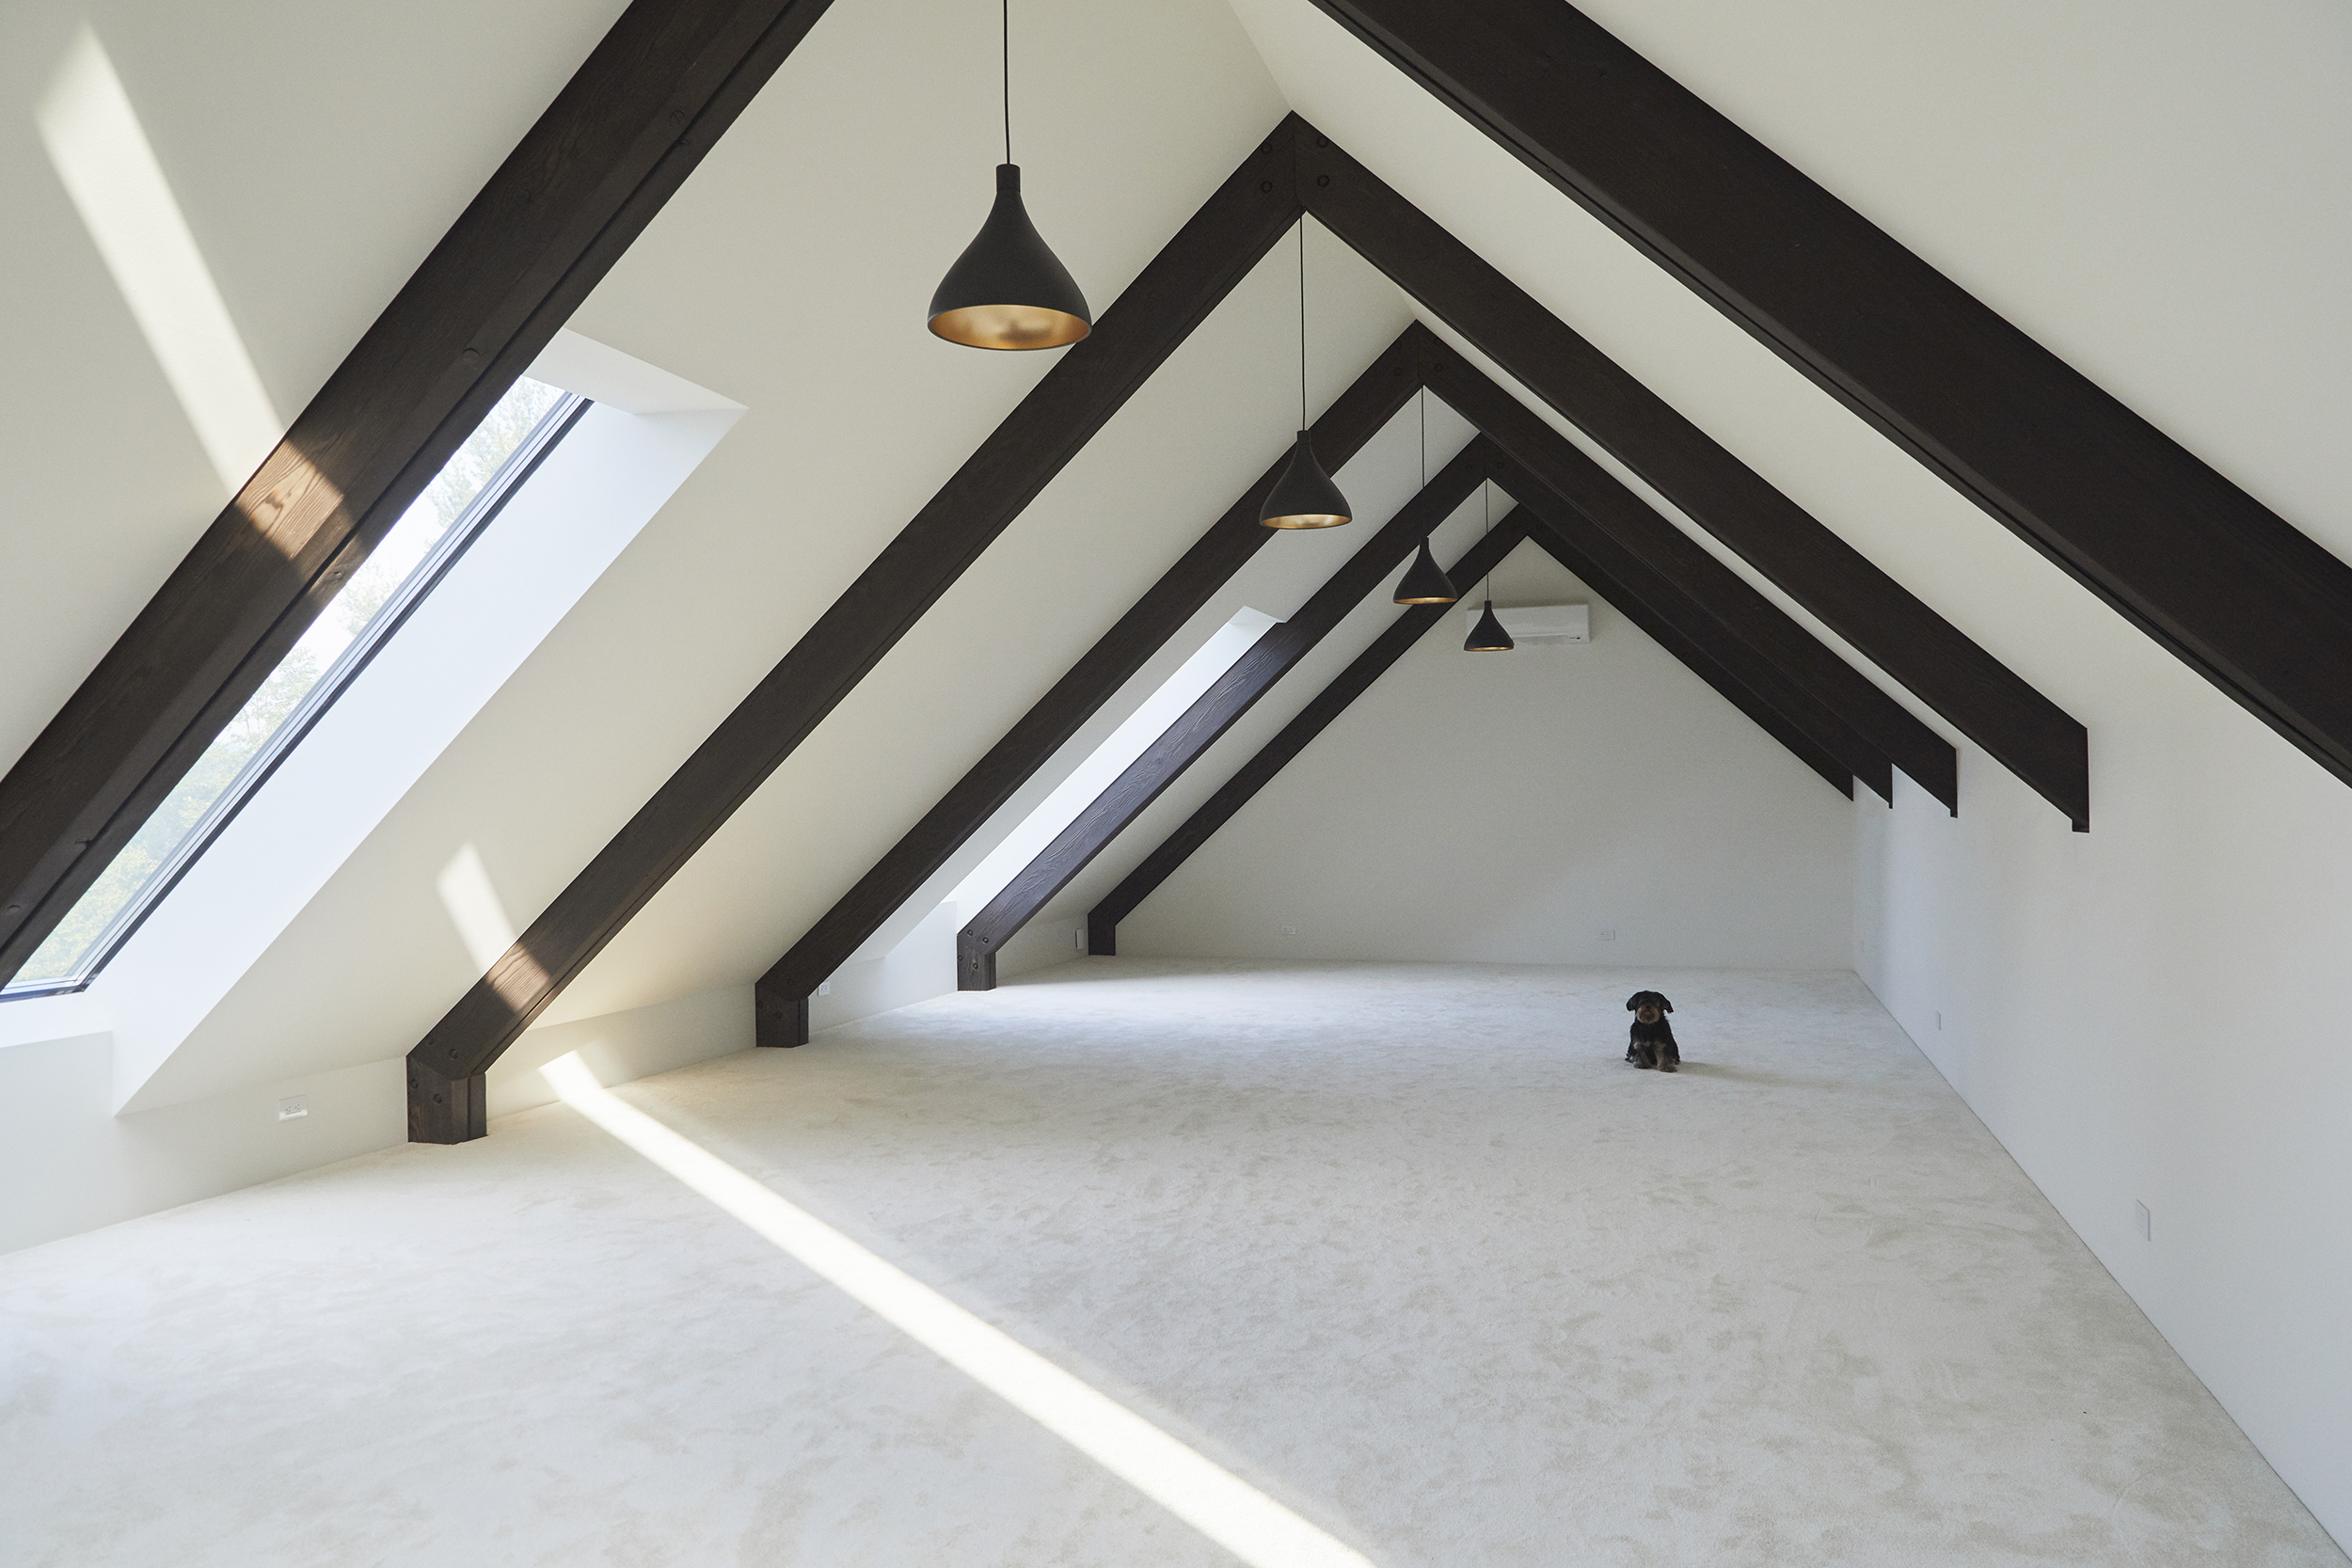 Upstairs the minimalist multi-purpose loft is lit by skylights, aligned perfectly for star-gazing at night